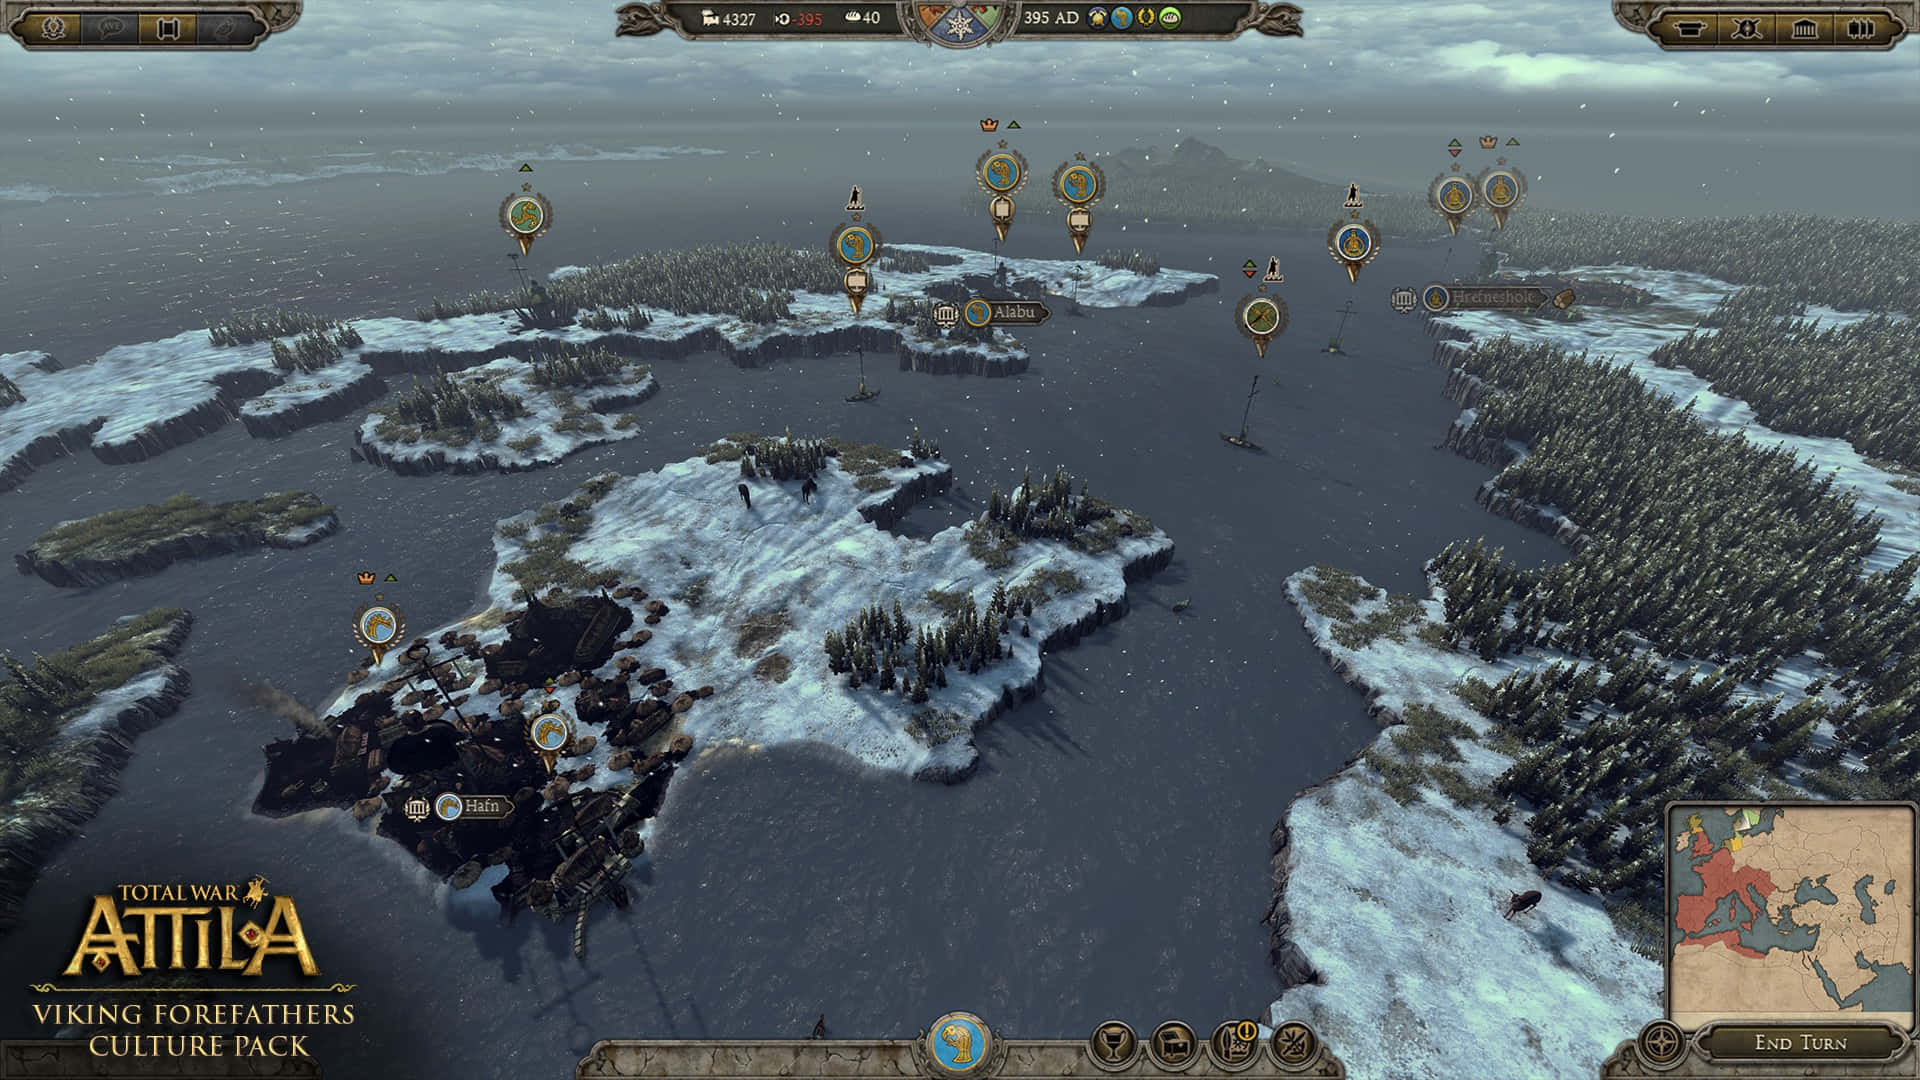 A Screenshot Of A Game With A Map And A Ship